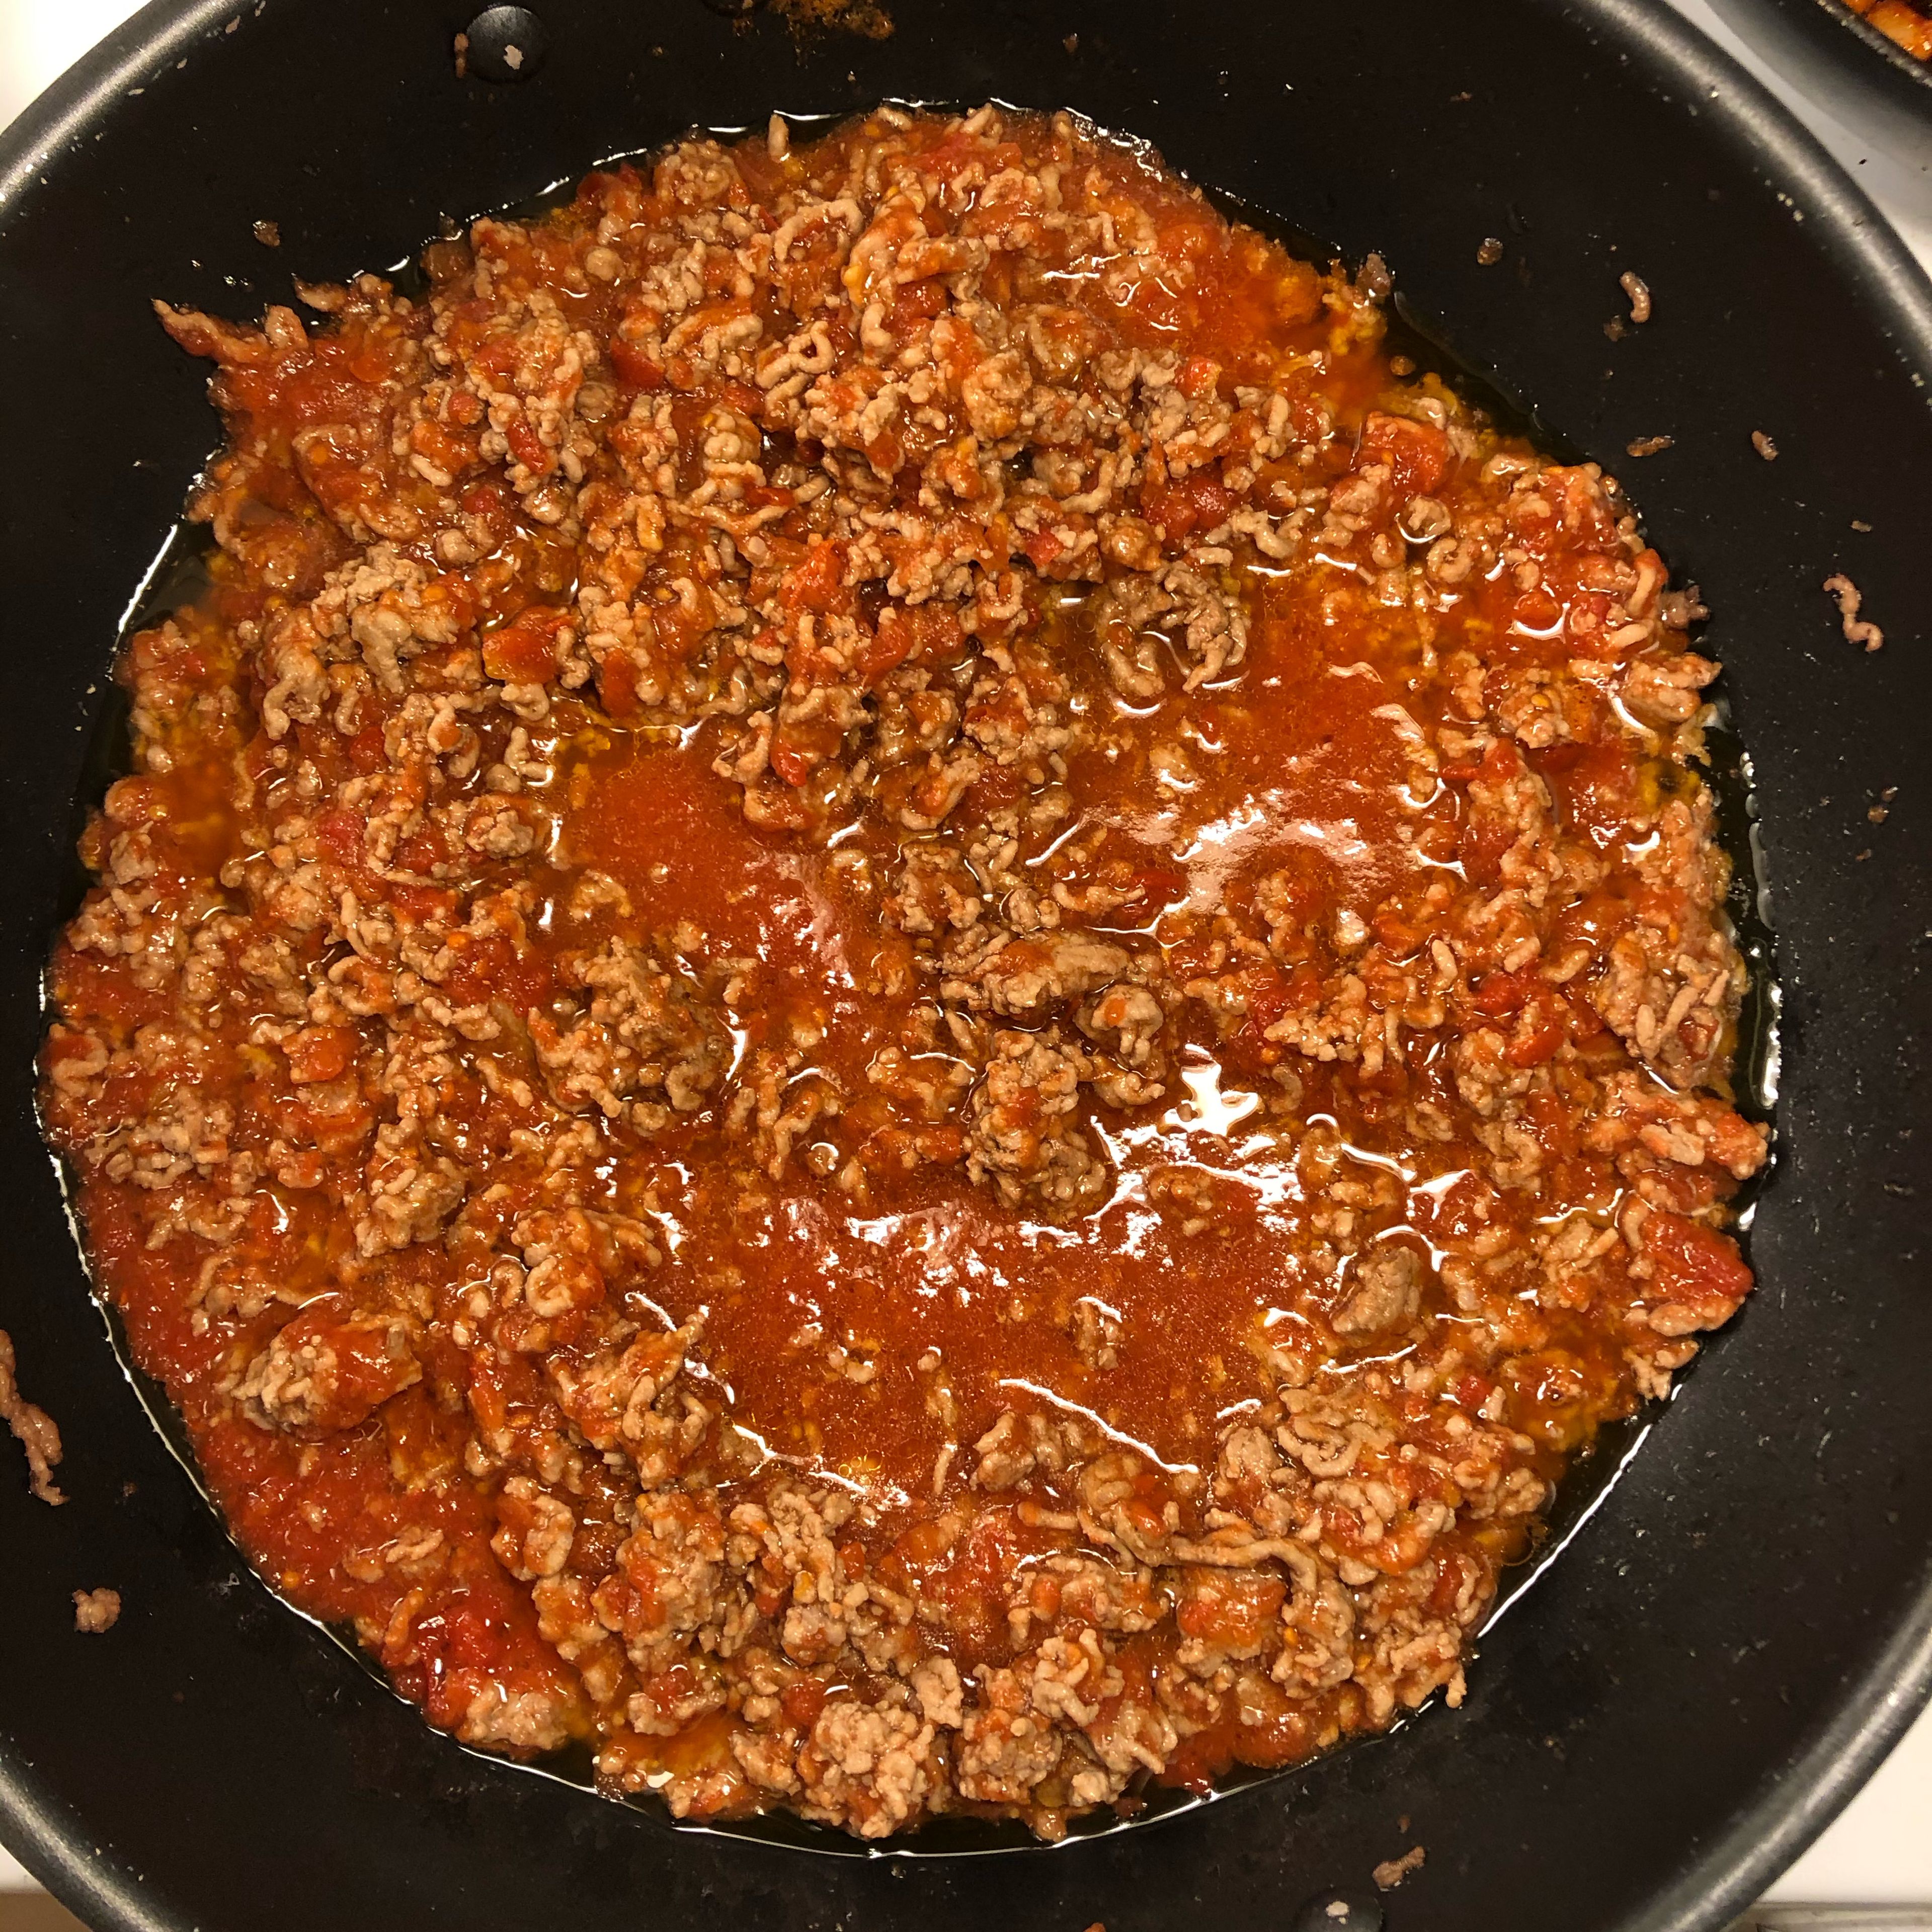 Fry the minced meat in butter on low temperature, add tomatoe sauce and let simmer.